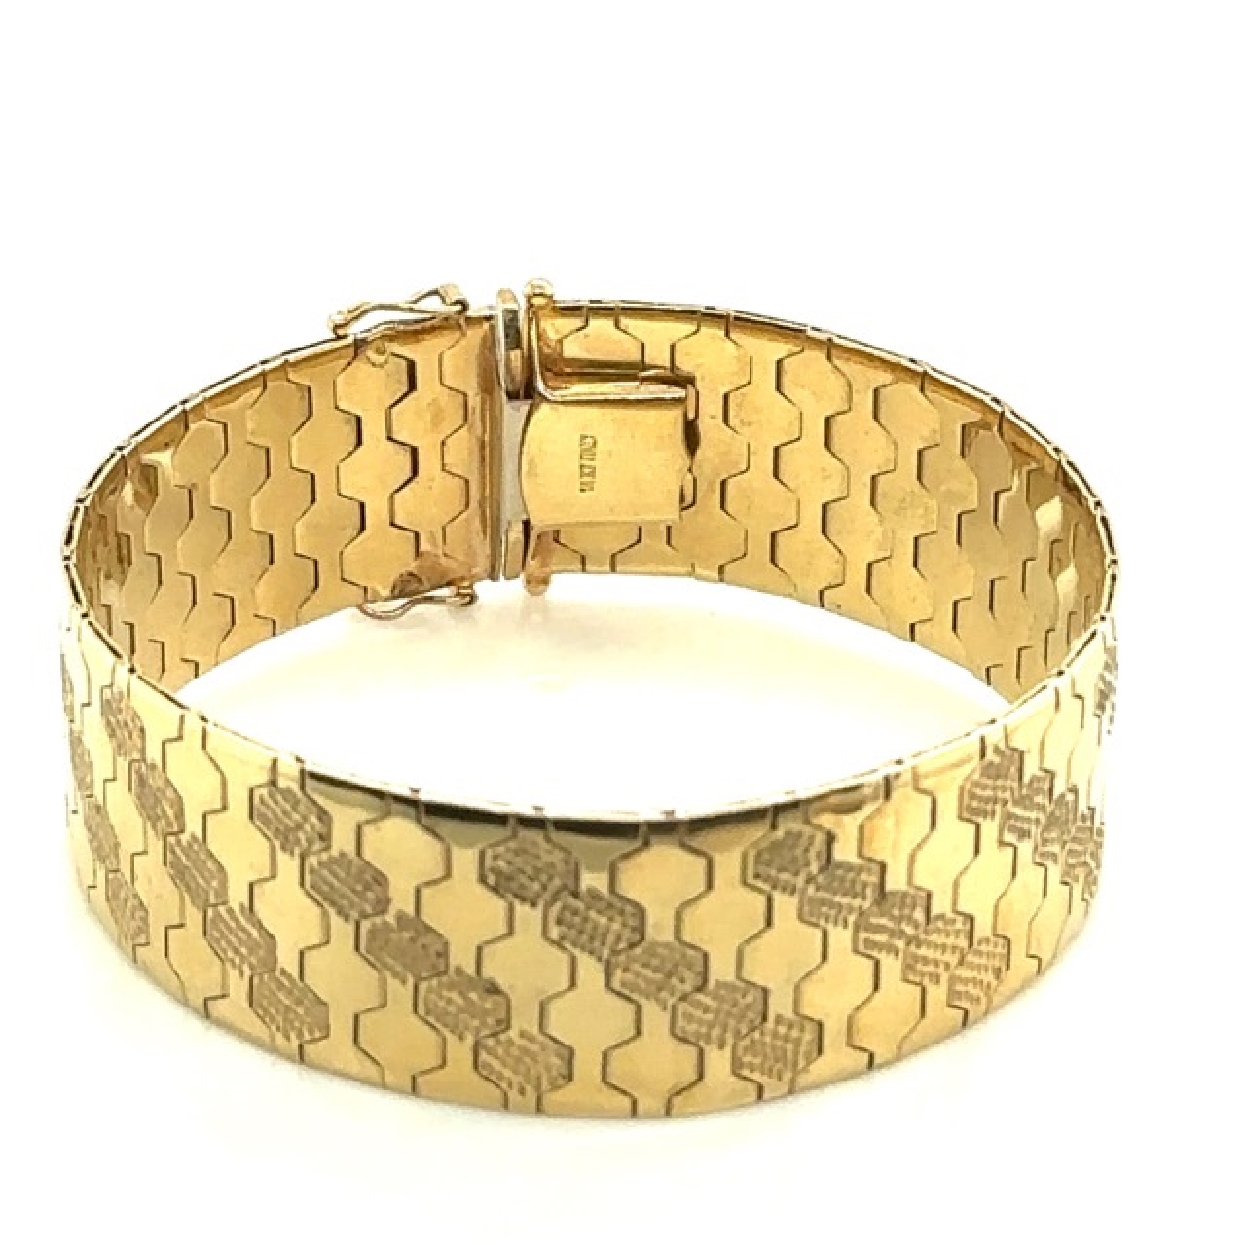 14K Yellow Gold Bracelet with Geometric Link Design 7 inches